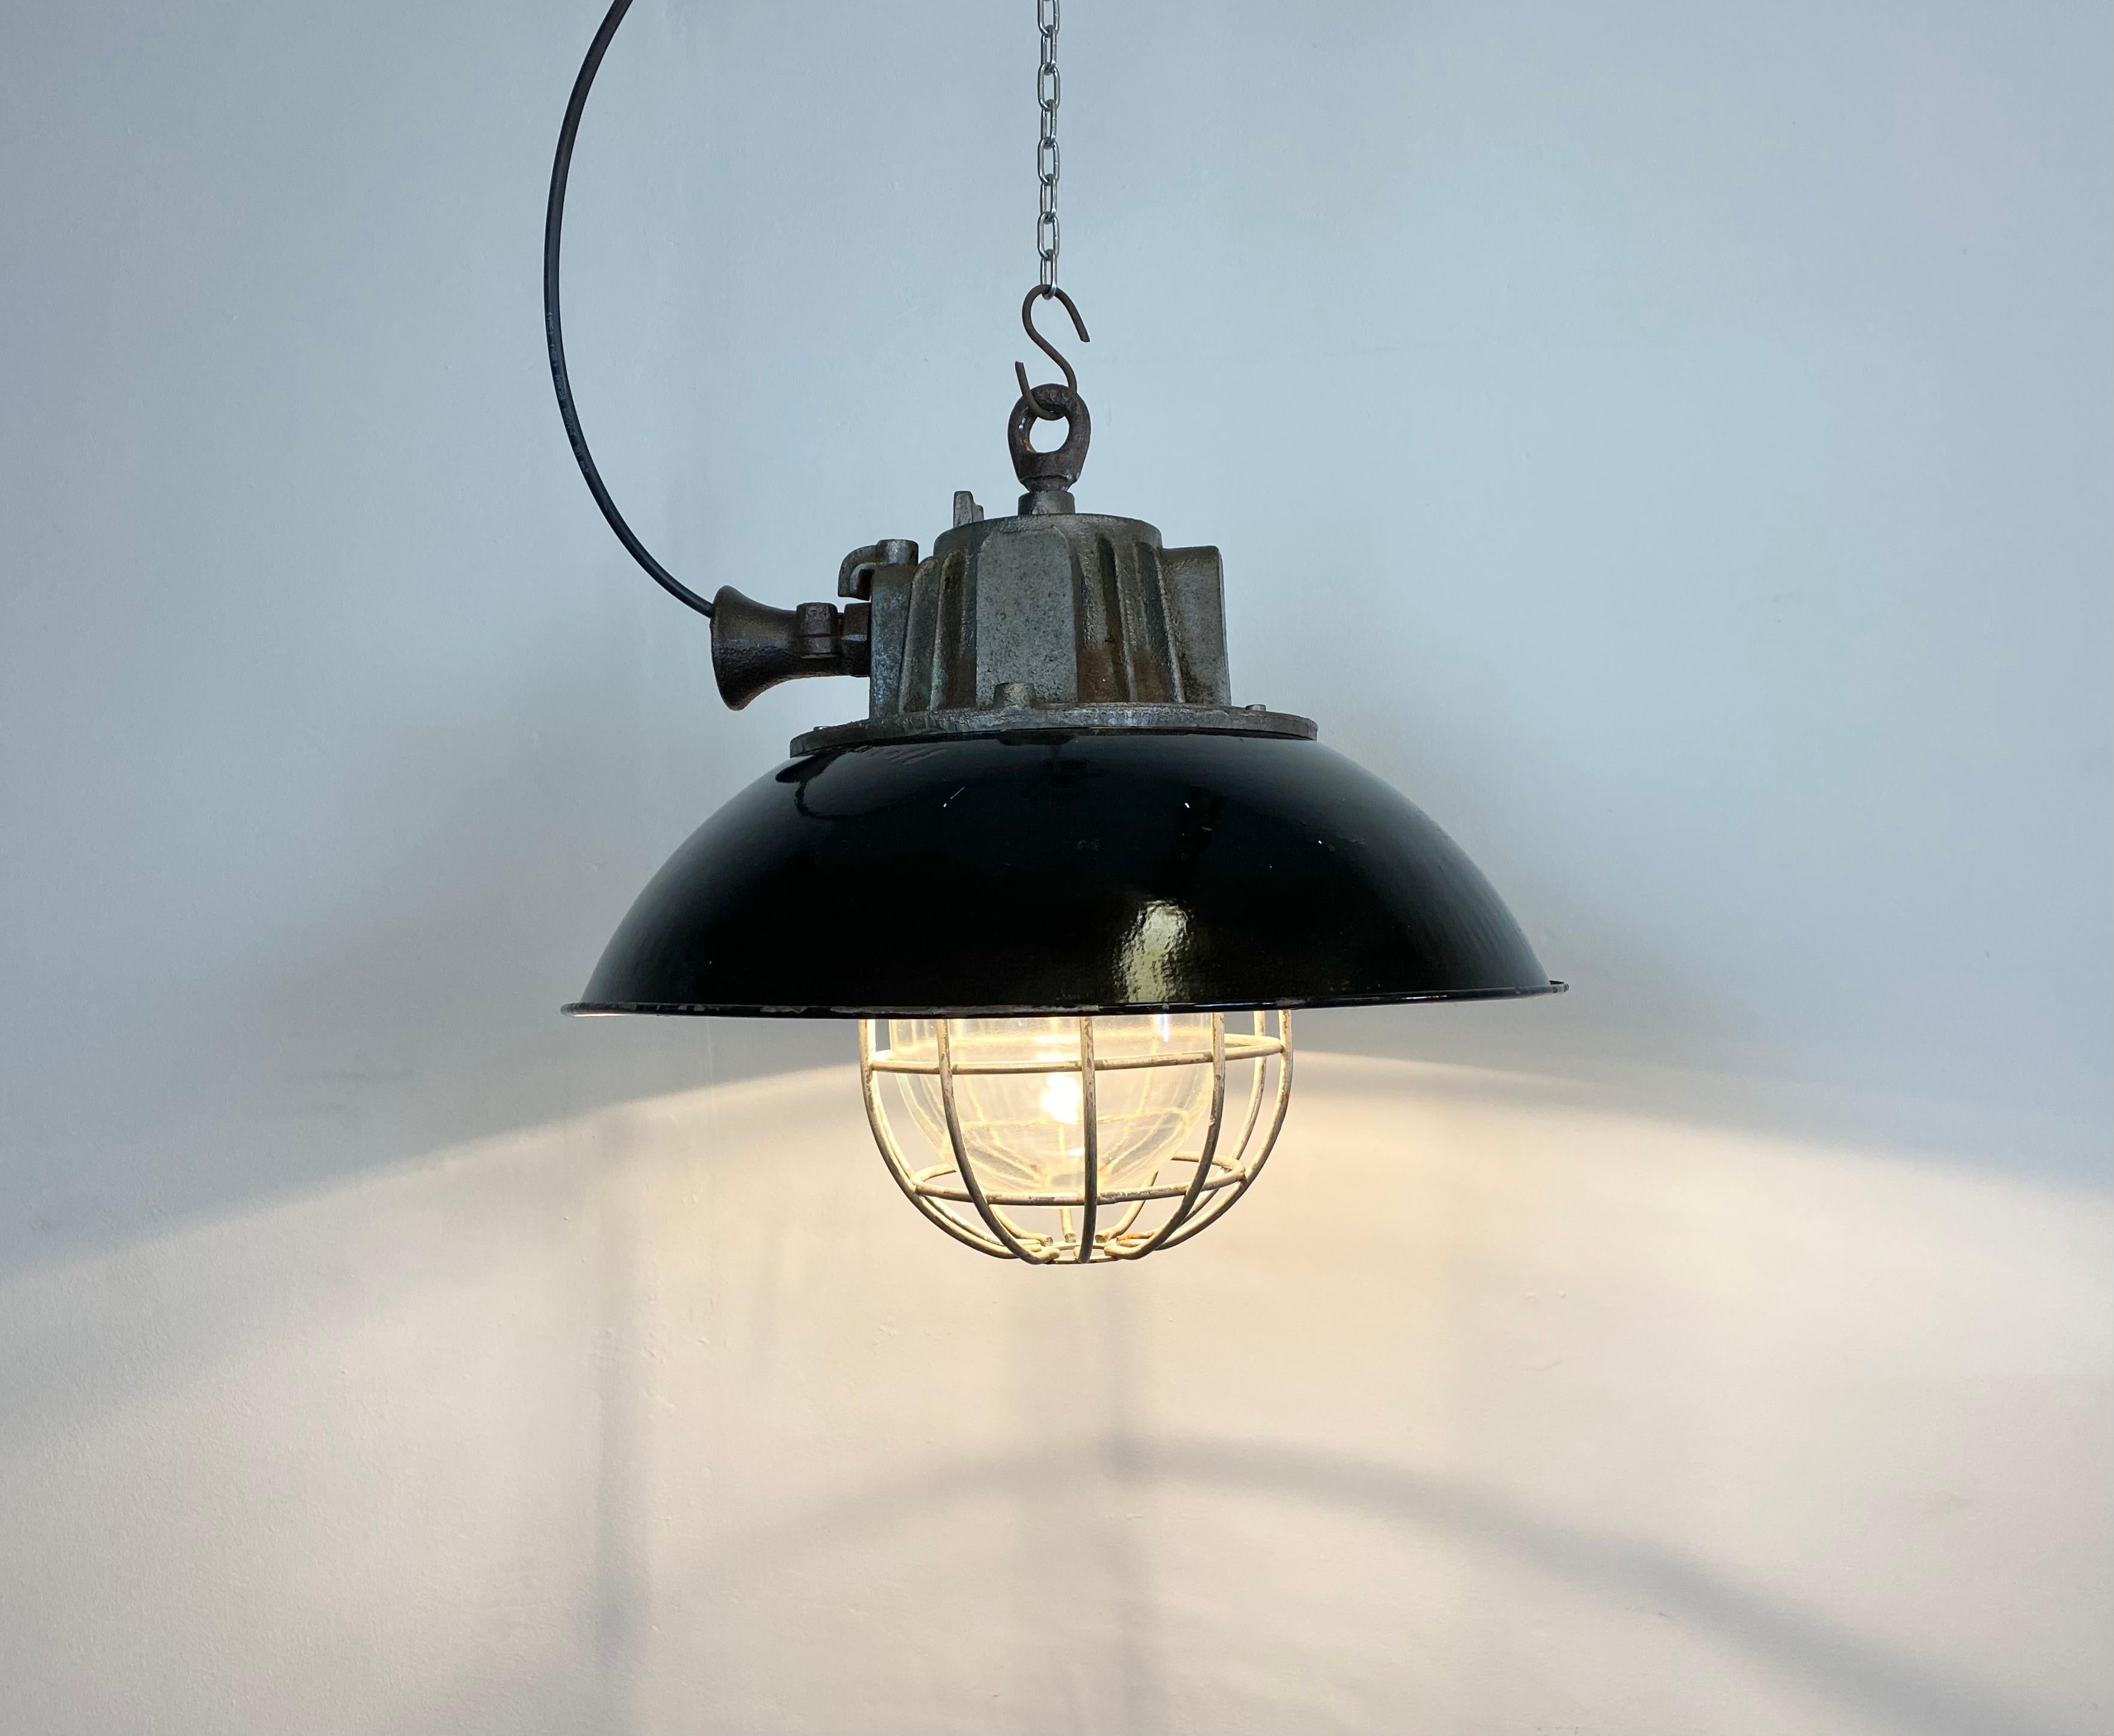 Black Enamel and Cast Iron Industrial Cage Pendant Light, 1950s For Sale 5